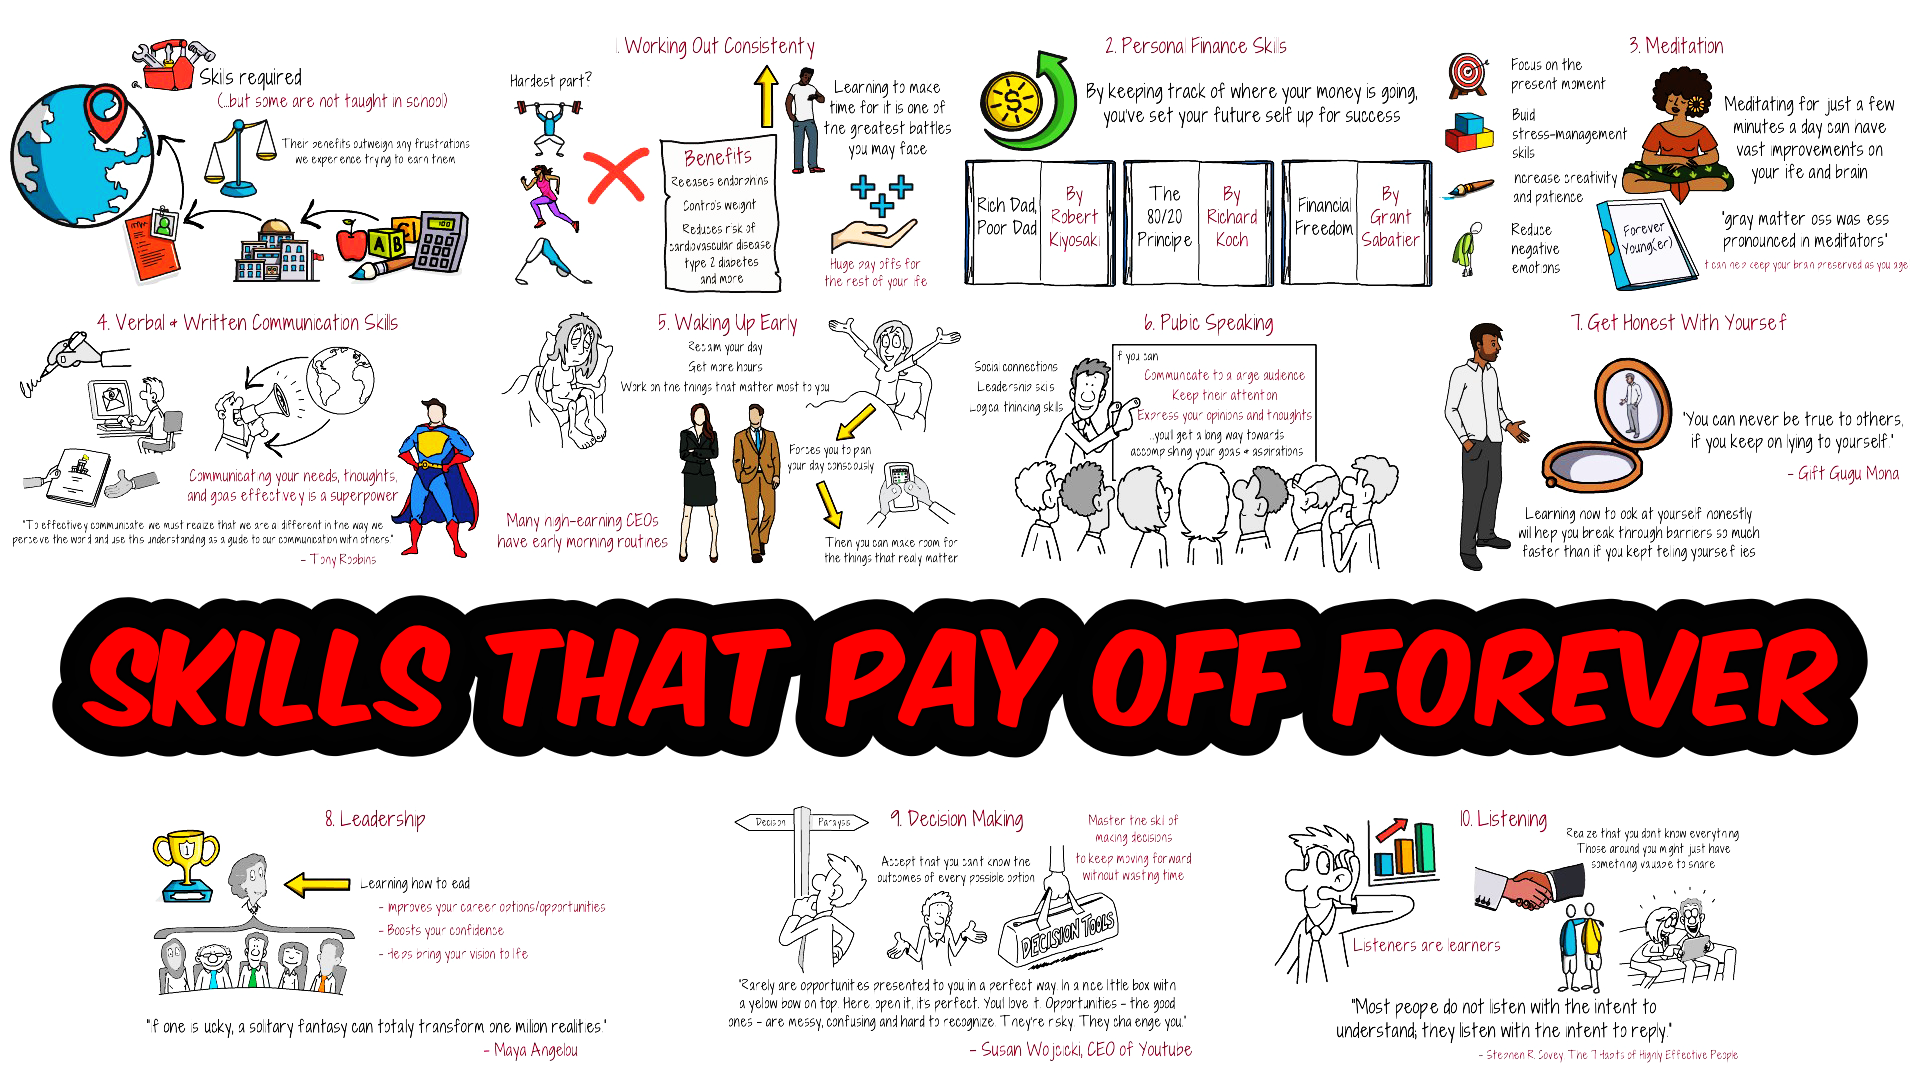 10 Difficult Skills that Pay Off Forever